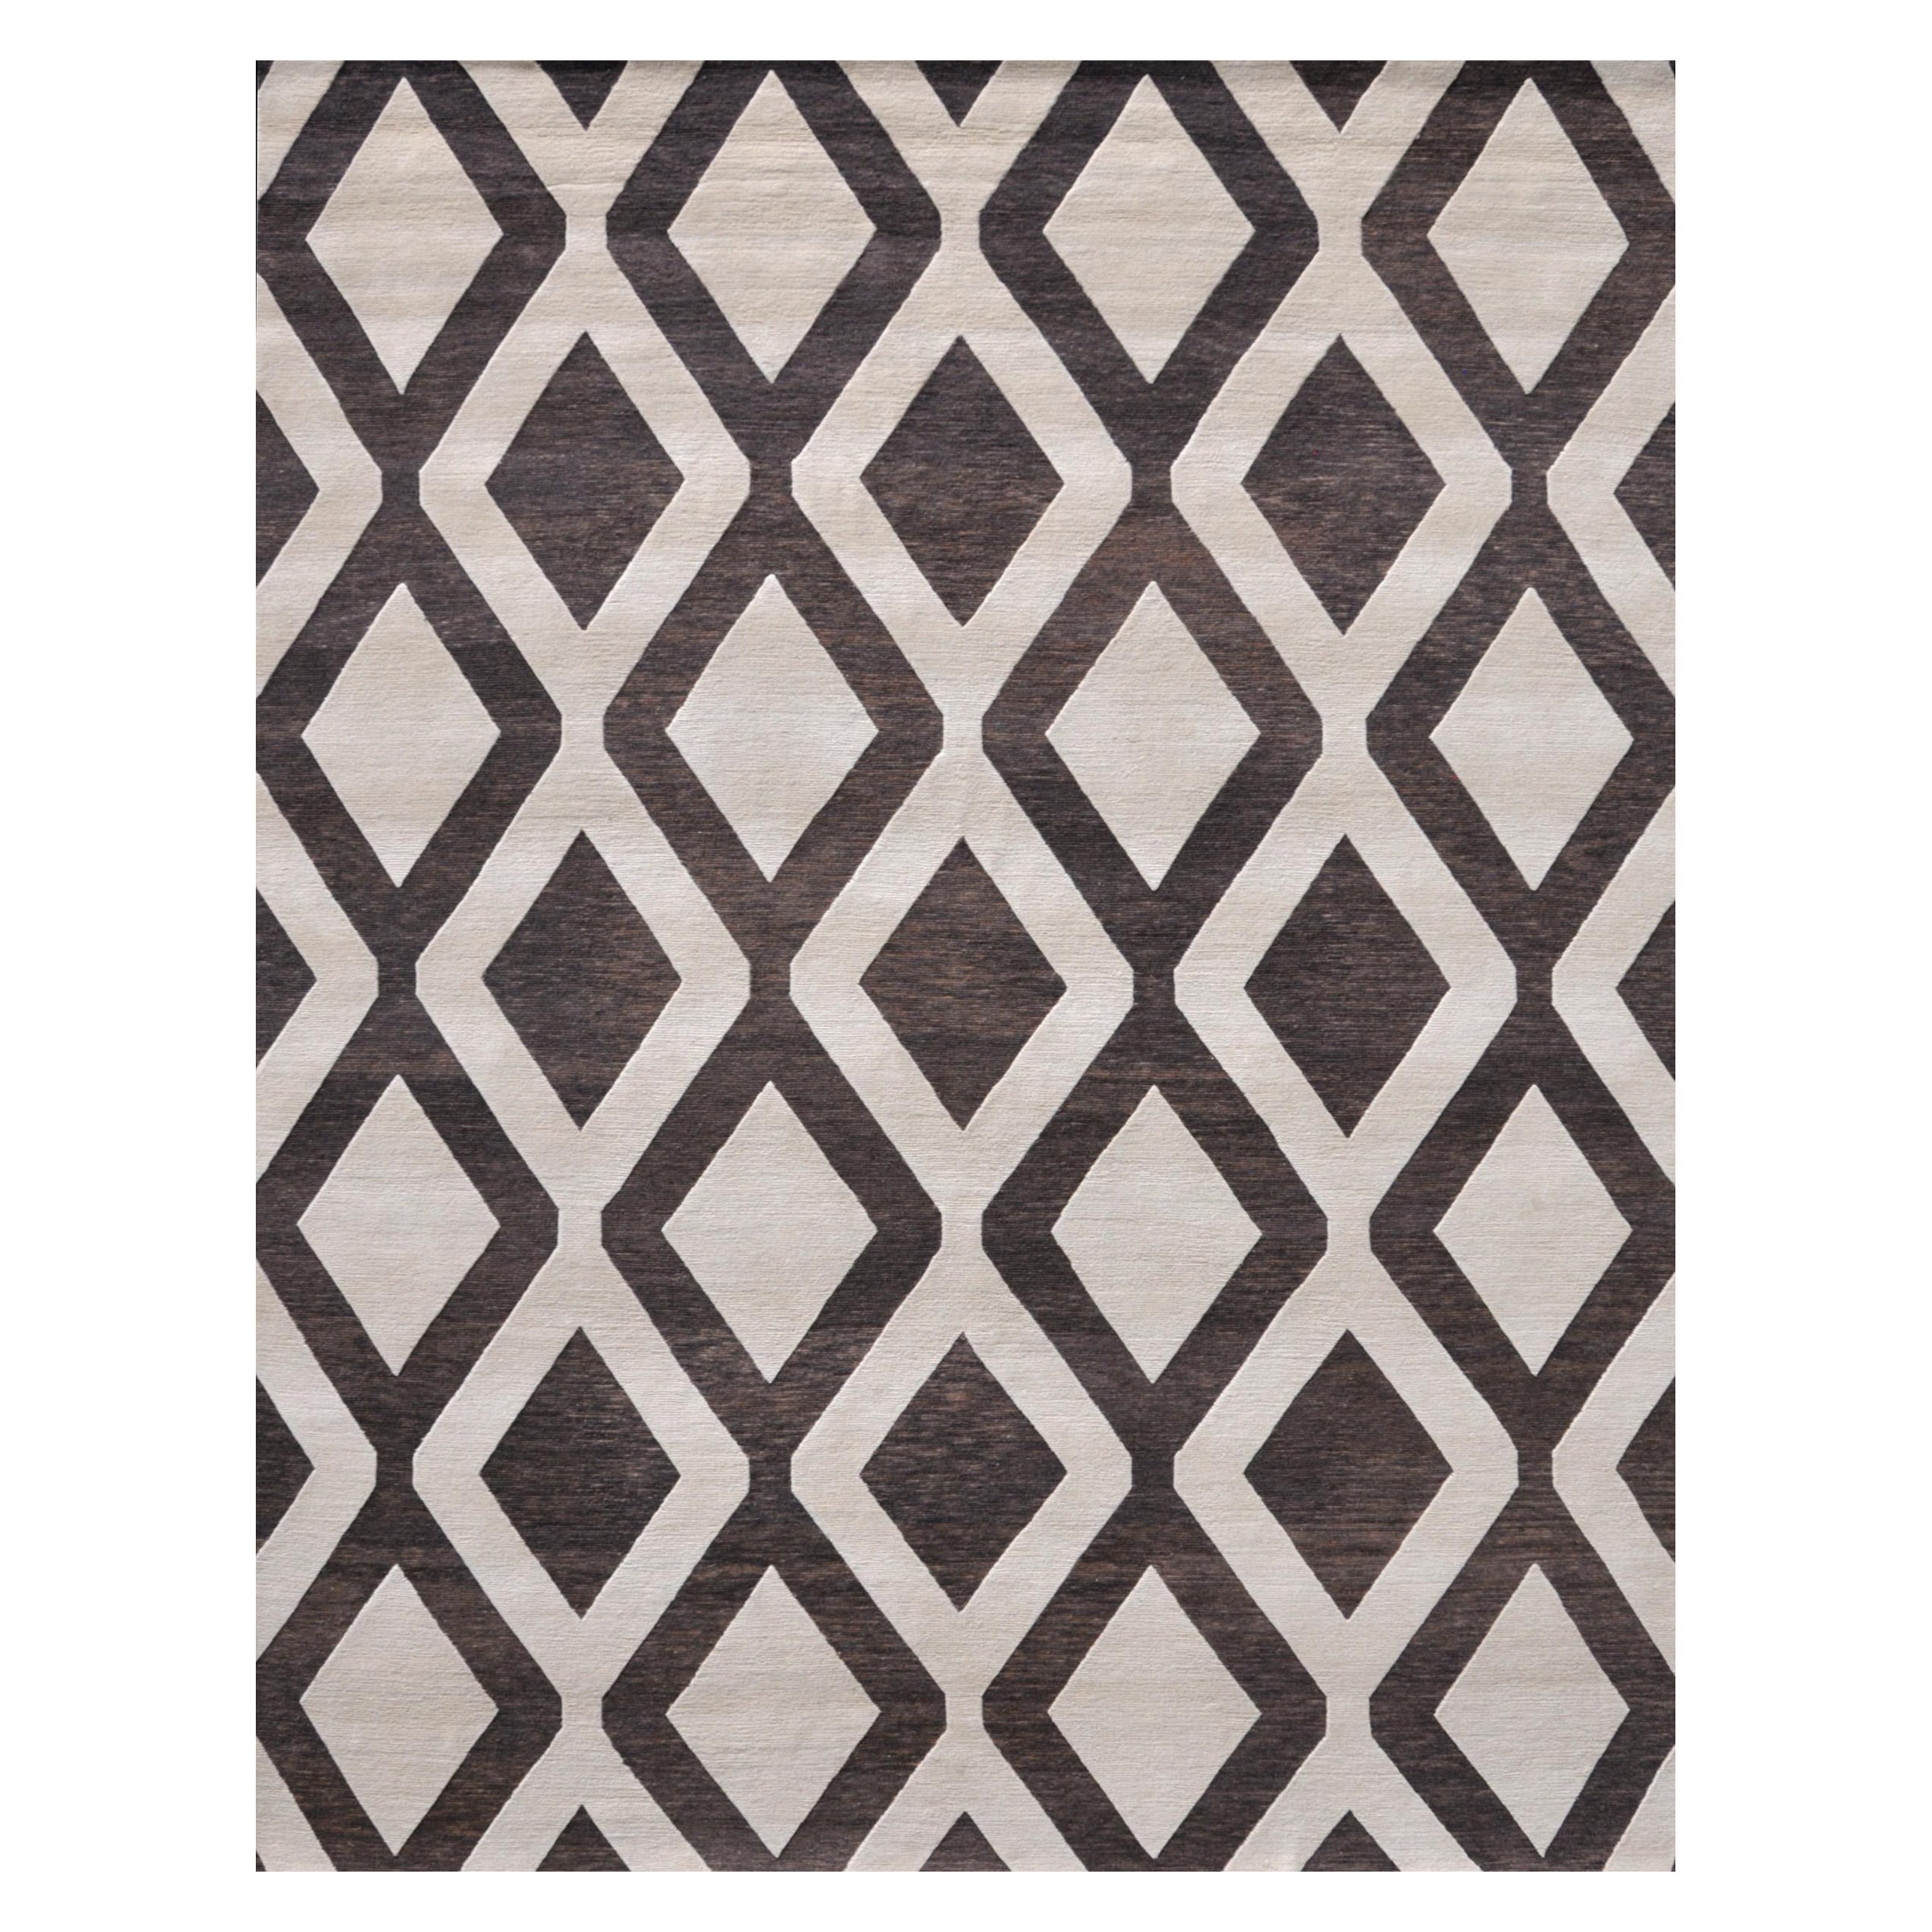 "Crossover - Brown & Cream" /  9' x 12' / Hand-Knotted Wool Rug For Sale